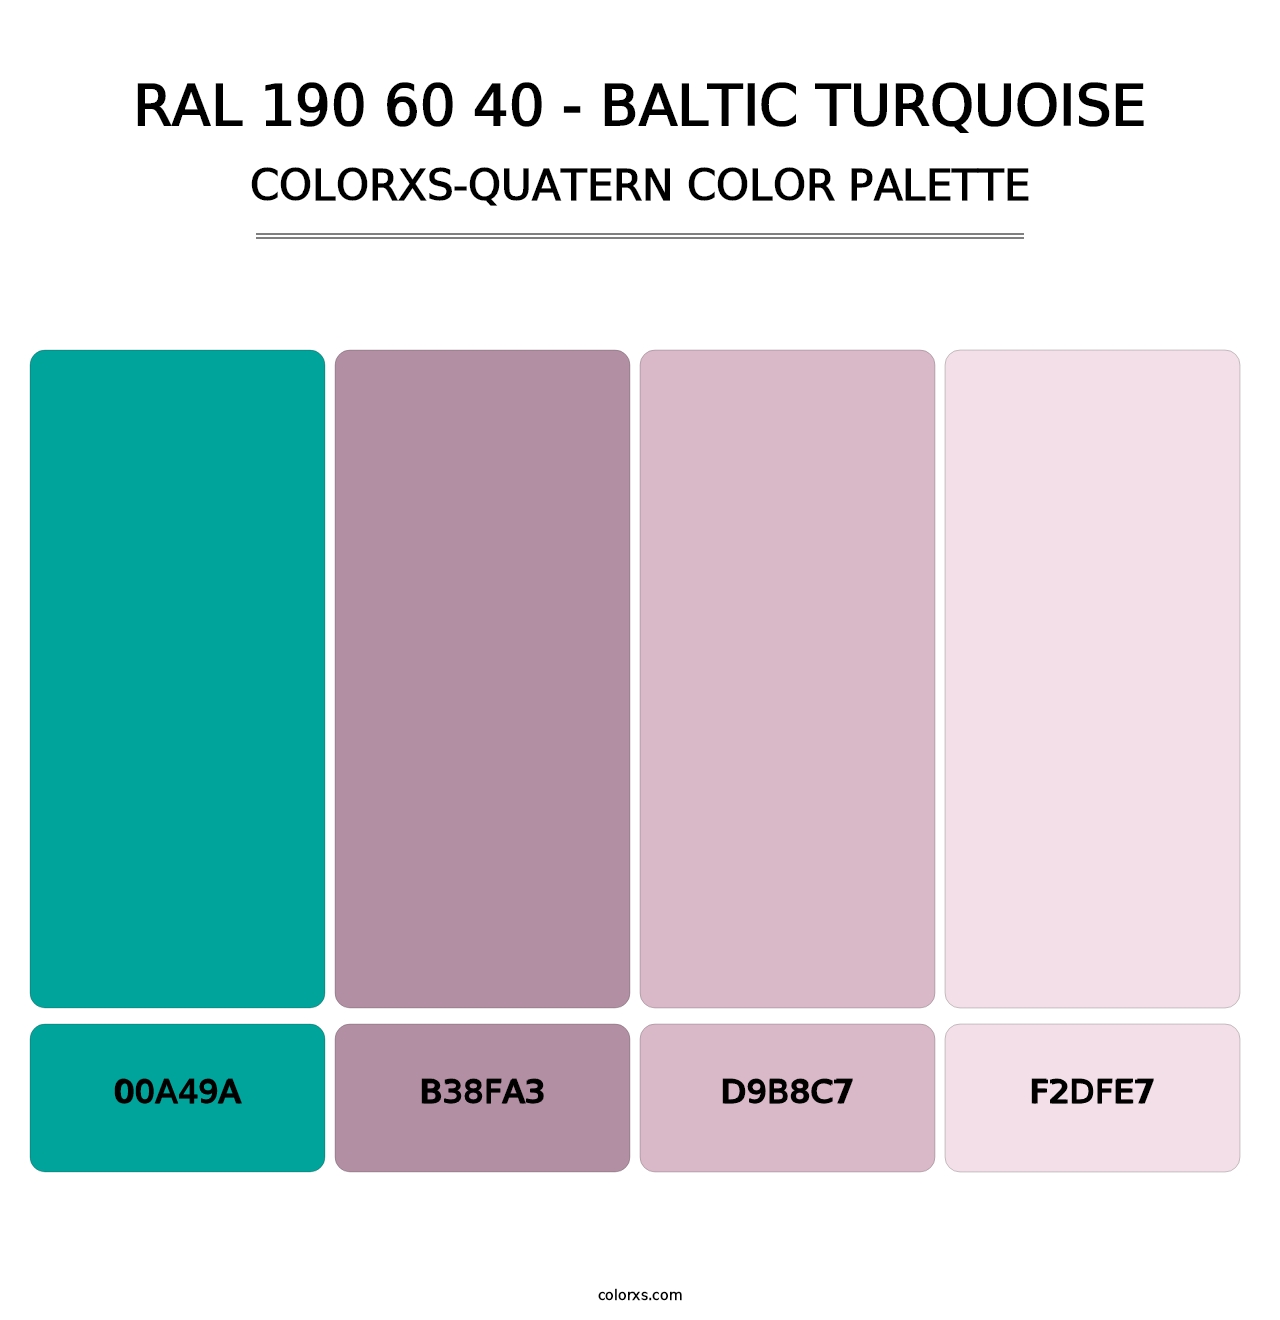 RAL 190 60 40 - Baltic Turquoise - Colorxs Quatern Palette